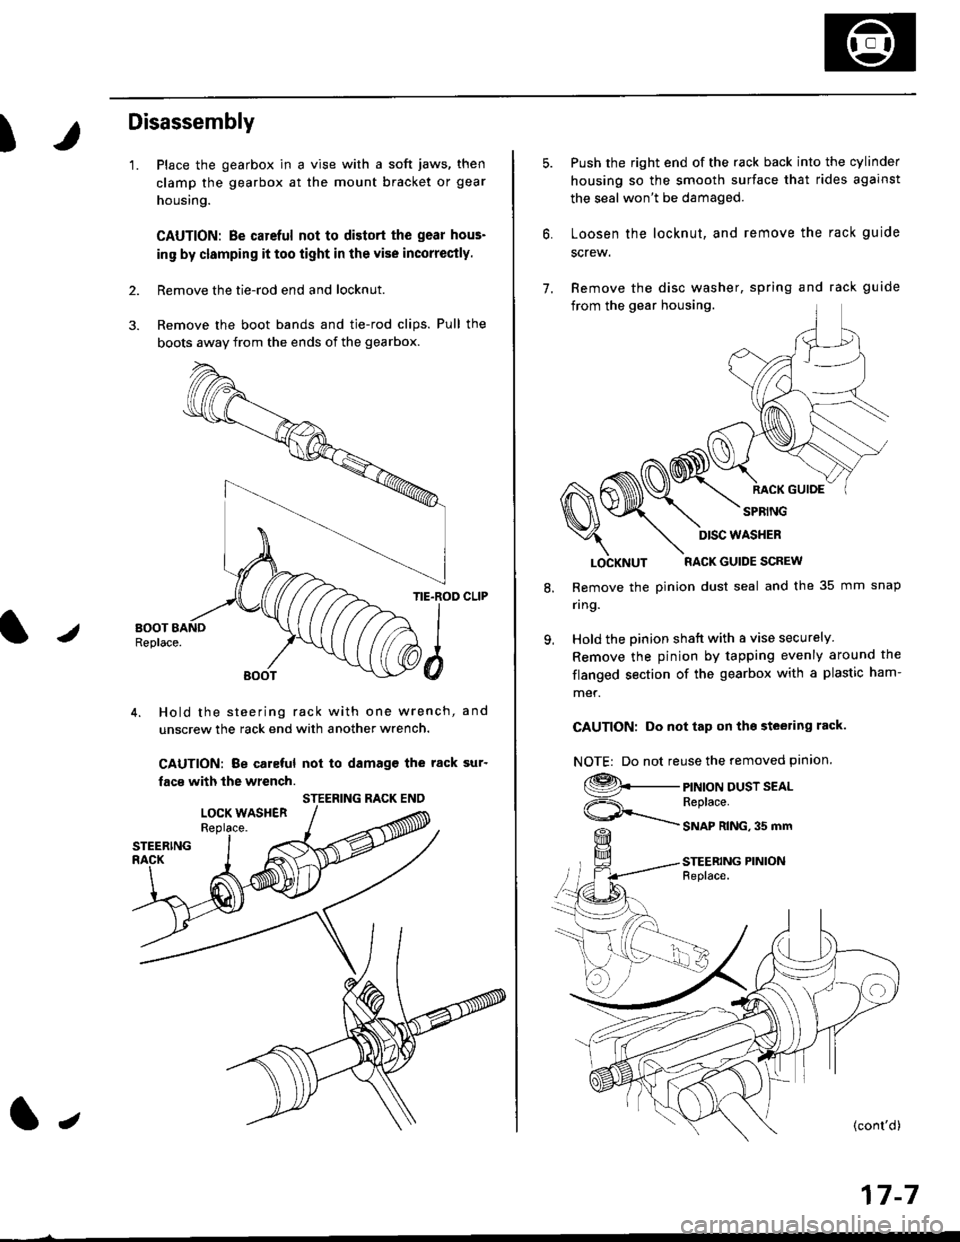 HONDA CIVIC 2000 6.G Owners Manual )
Disassembly
1.
2.
Place the gearbox in a vise with a soft jaws, then
clamp the gearbox at the mount bracket or gear
housing.
CAUTION: Be carcful not to distort the gear hous-
in9 by clamping it too